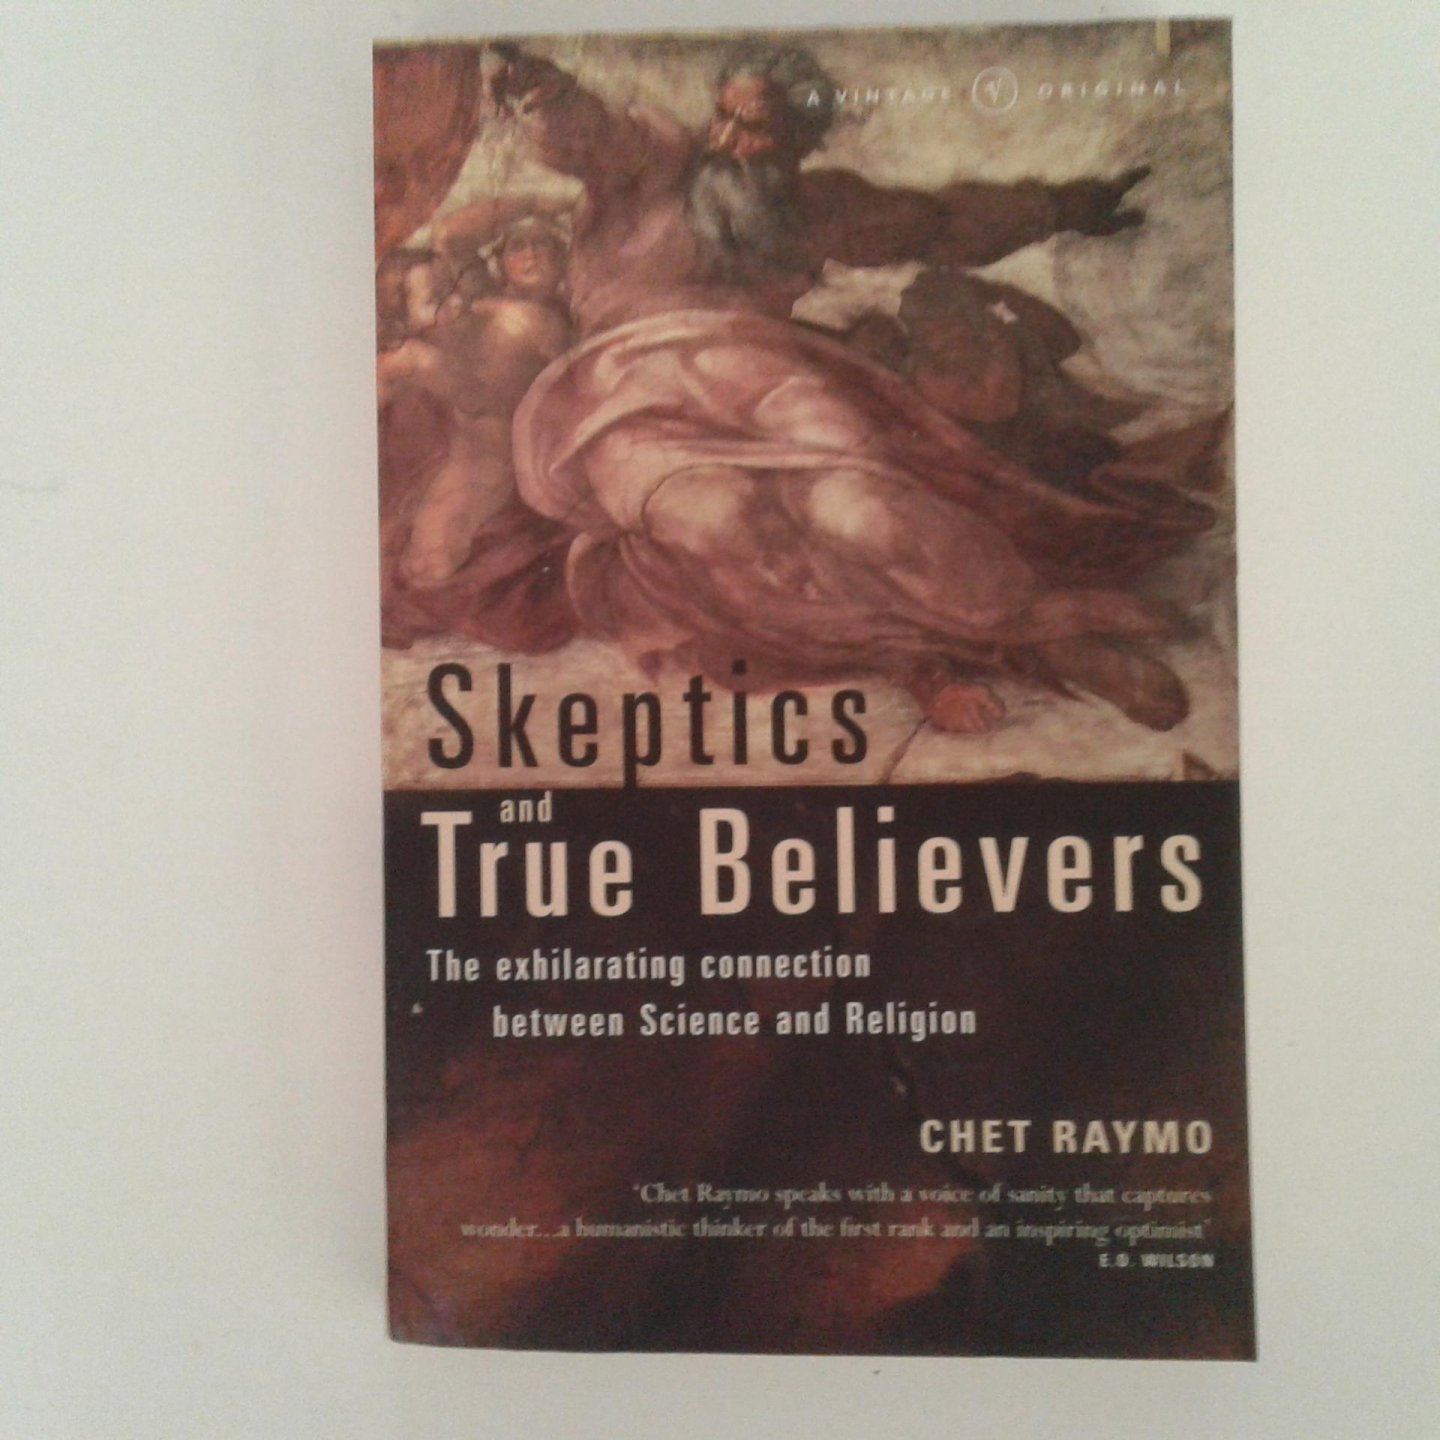 Raymo, Chet - Skeptics and True Believers ; The Exhilarating connection between Science and Religion